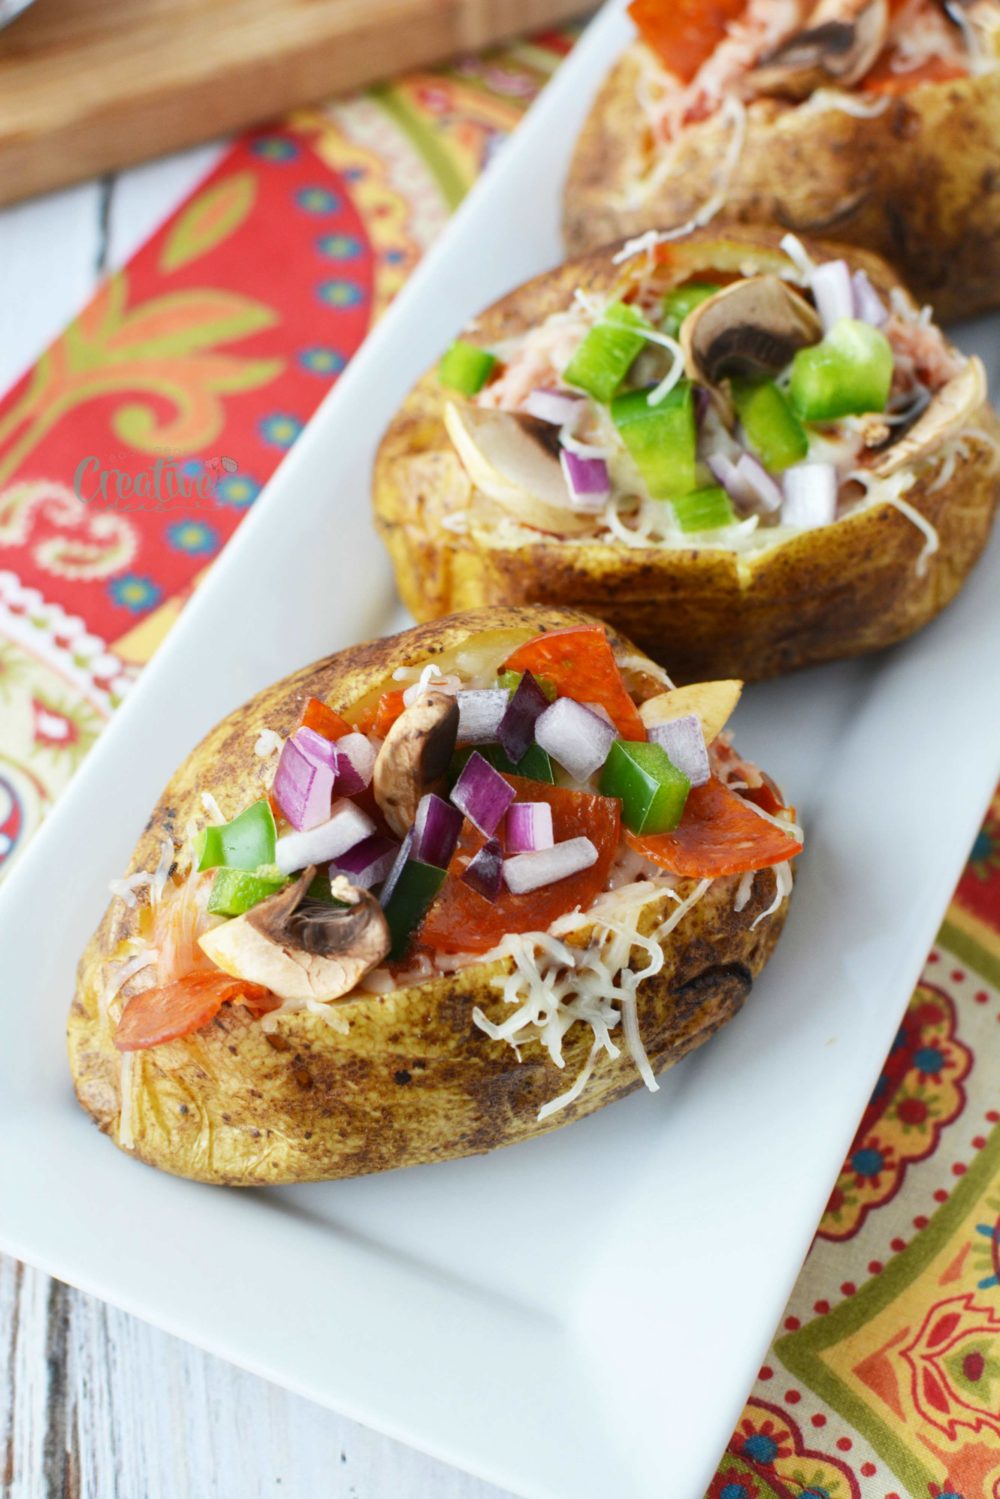 Perfect for any gatherings, parties or barbecues, these pizza baked potatoes are loaded with pepperoni, mushrooms, peppers and cheesy goodness!